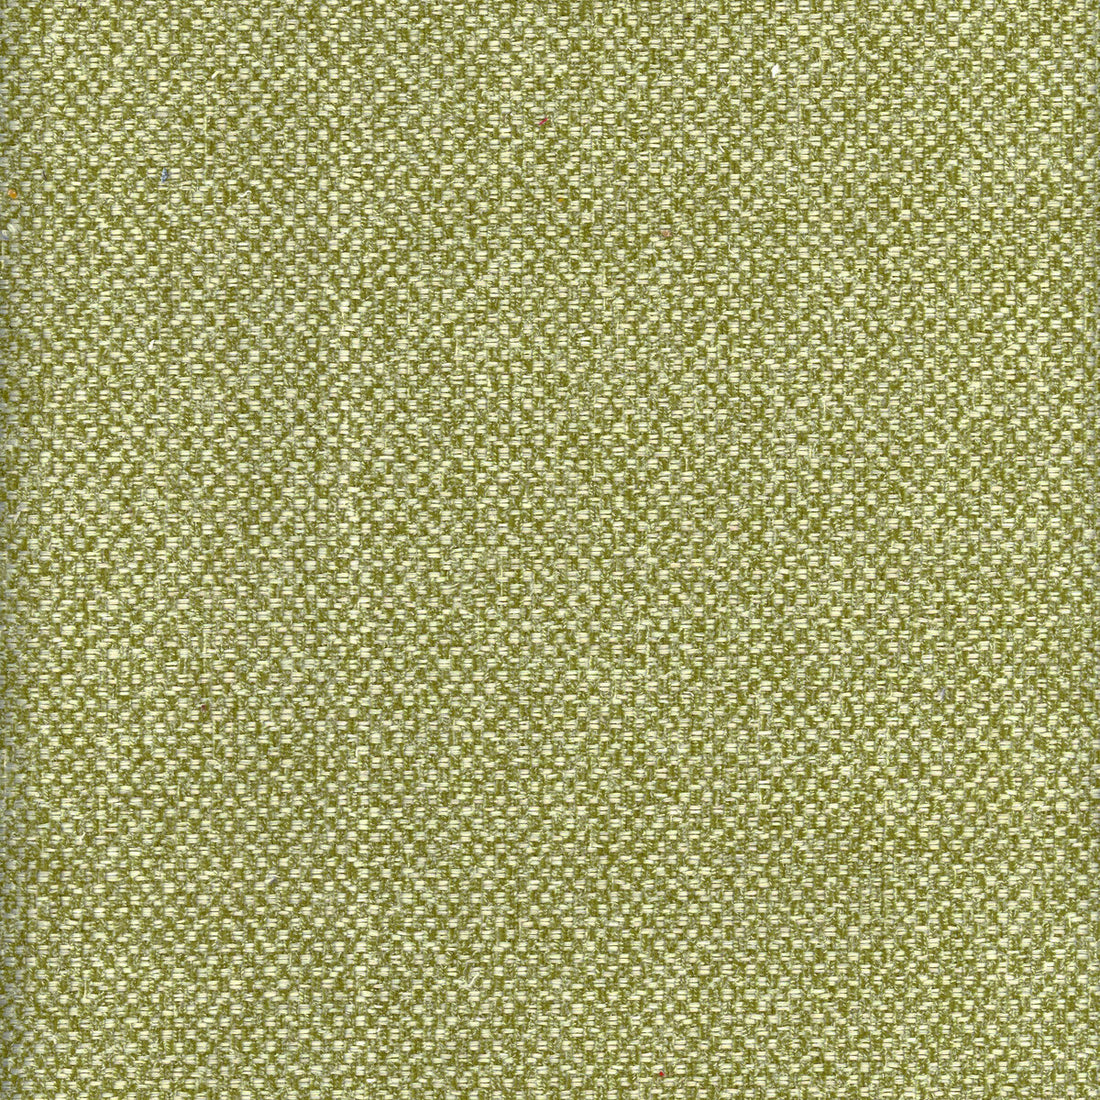 Yosemite fabric in meadow color - pattern AM100332.3.0 - by Kravet Couture in the Andrew Martin Canyon collection